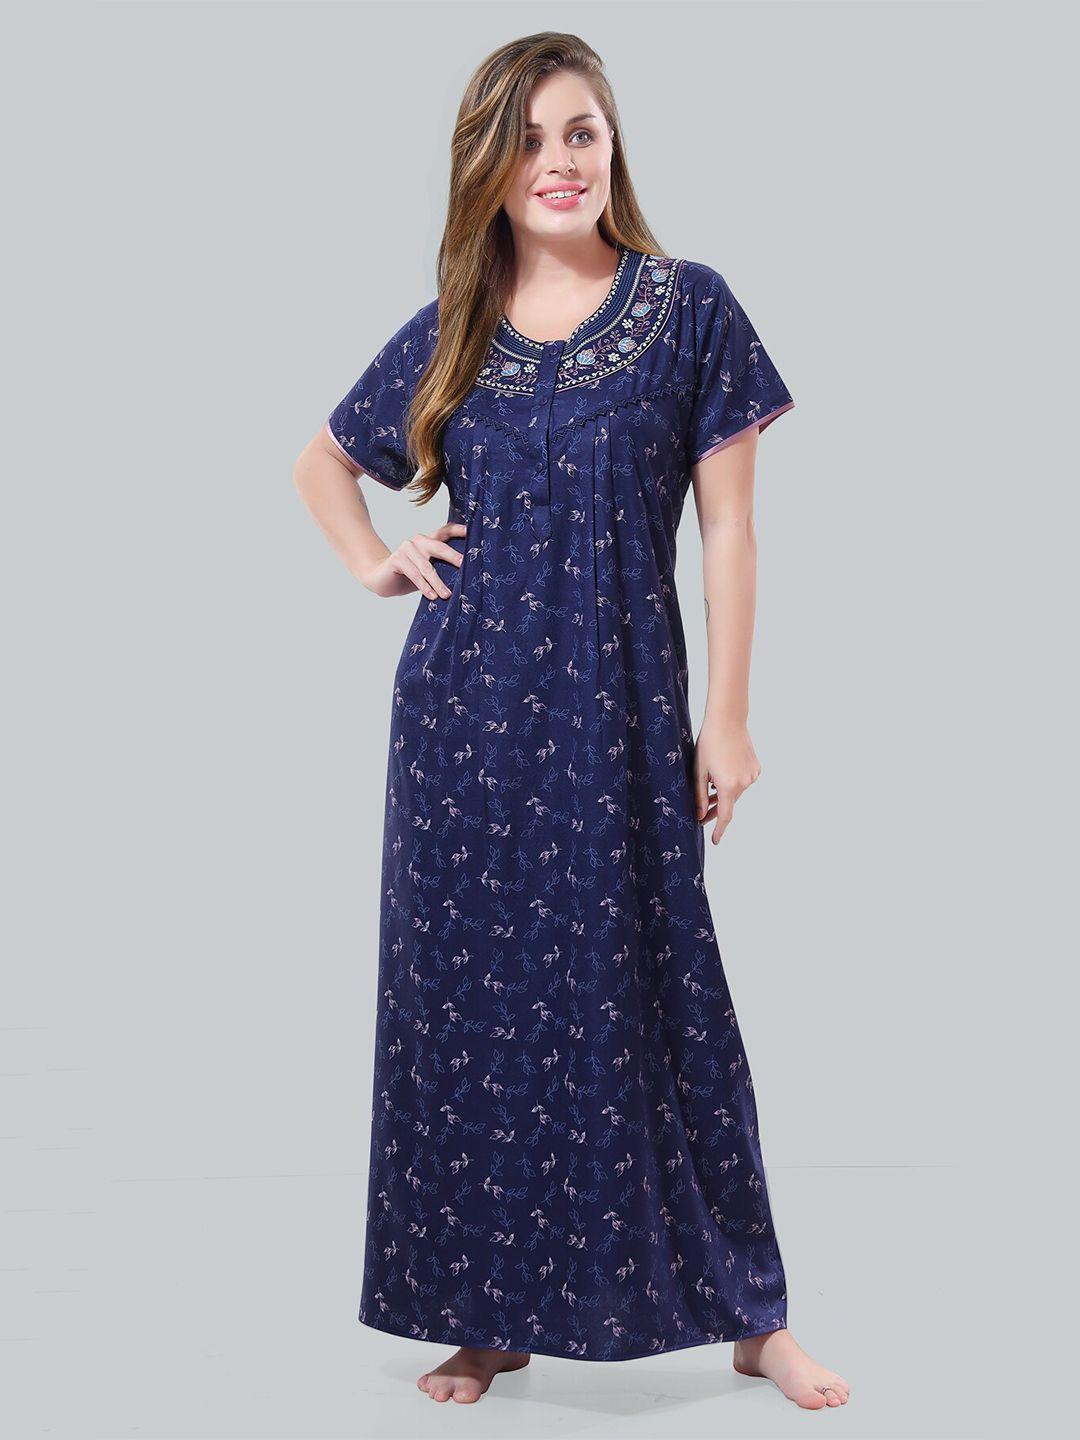 be-you-navy-blue-embroidered-maxi-nightdress